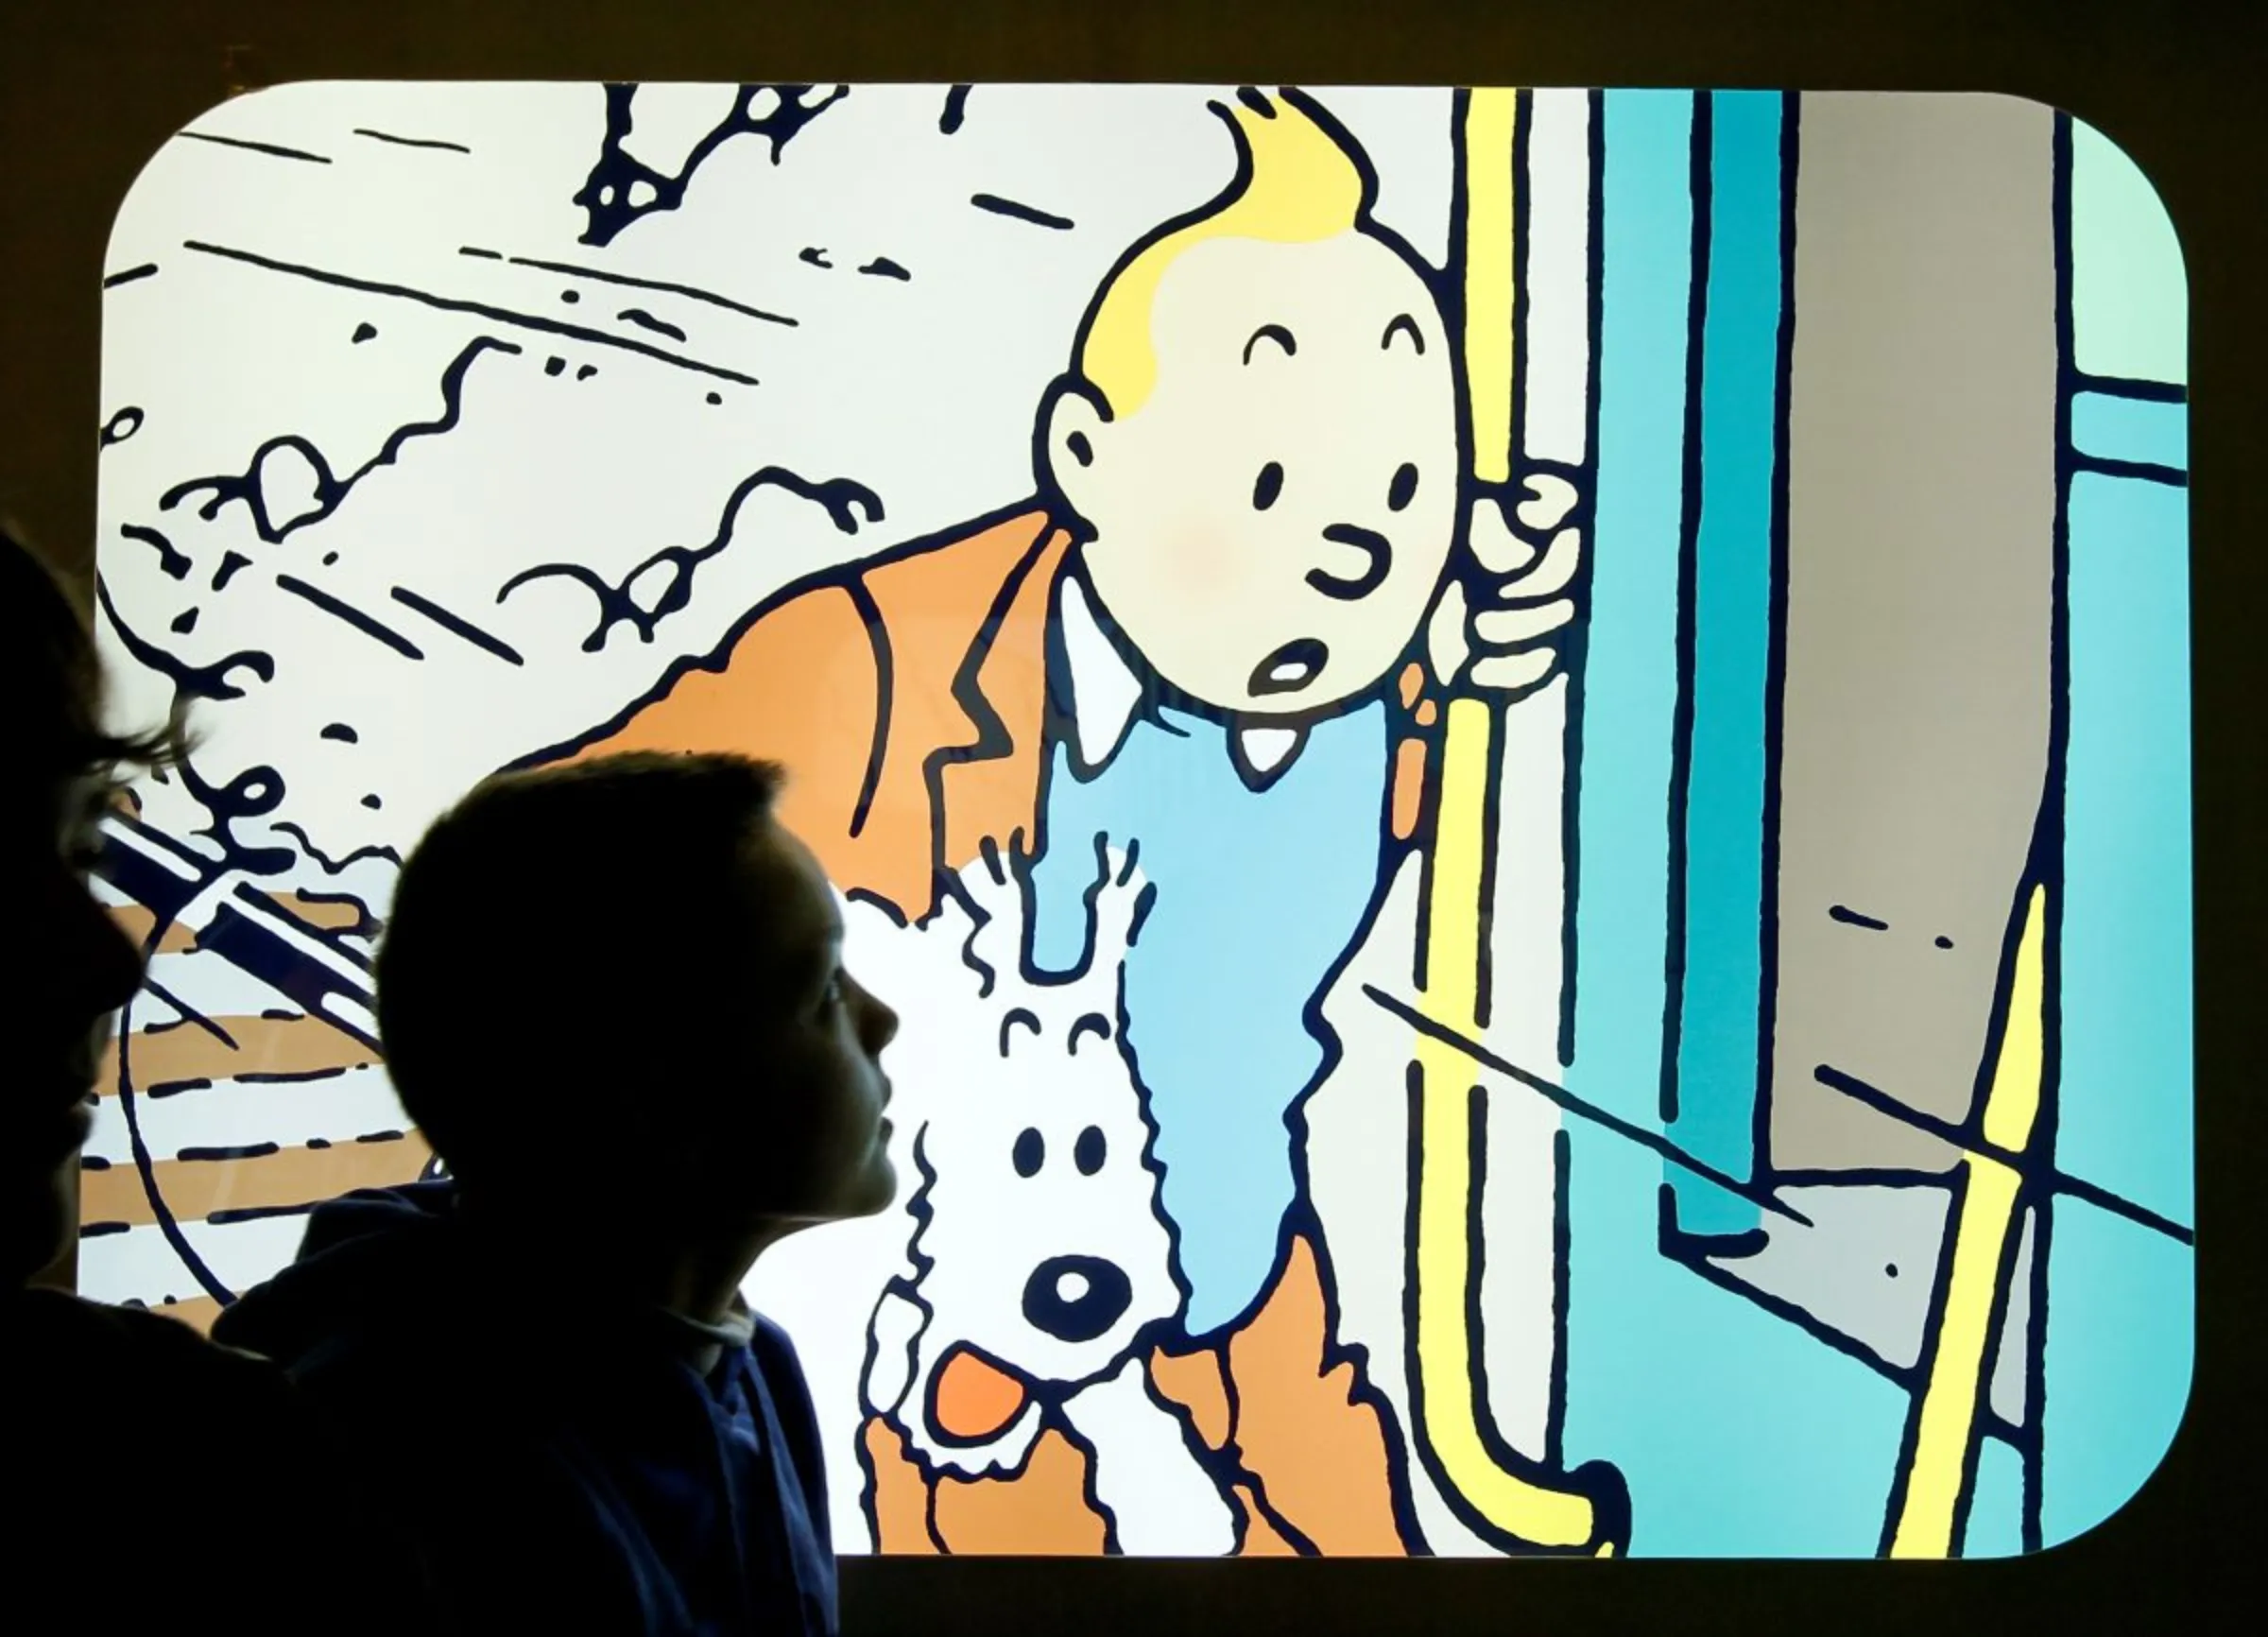 A student looks at a lightbox depicting the comic strip character Tintin by Brussels-born author Georges Remi, better known as Herge, displayed in a shop at the Herge Museum in Louvain-La-Neuve December 1, 2011. REUTERS/Yves Herman/Herge-Moulinsart